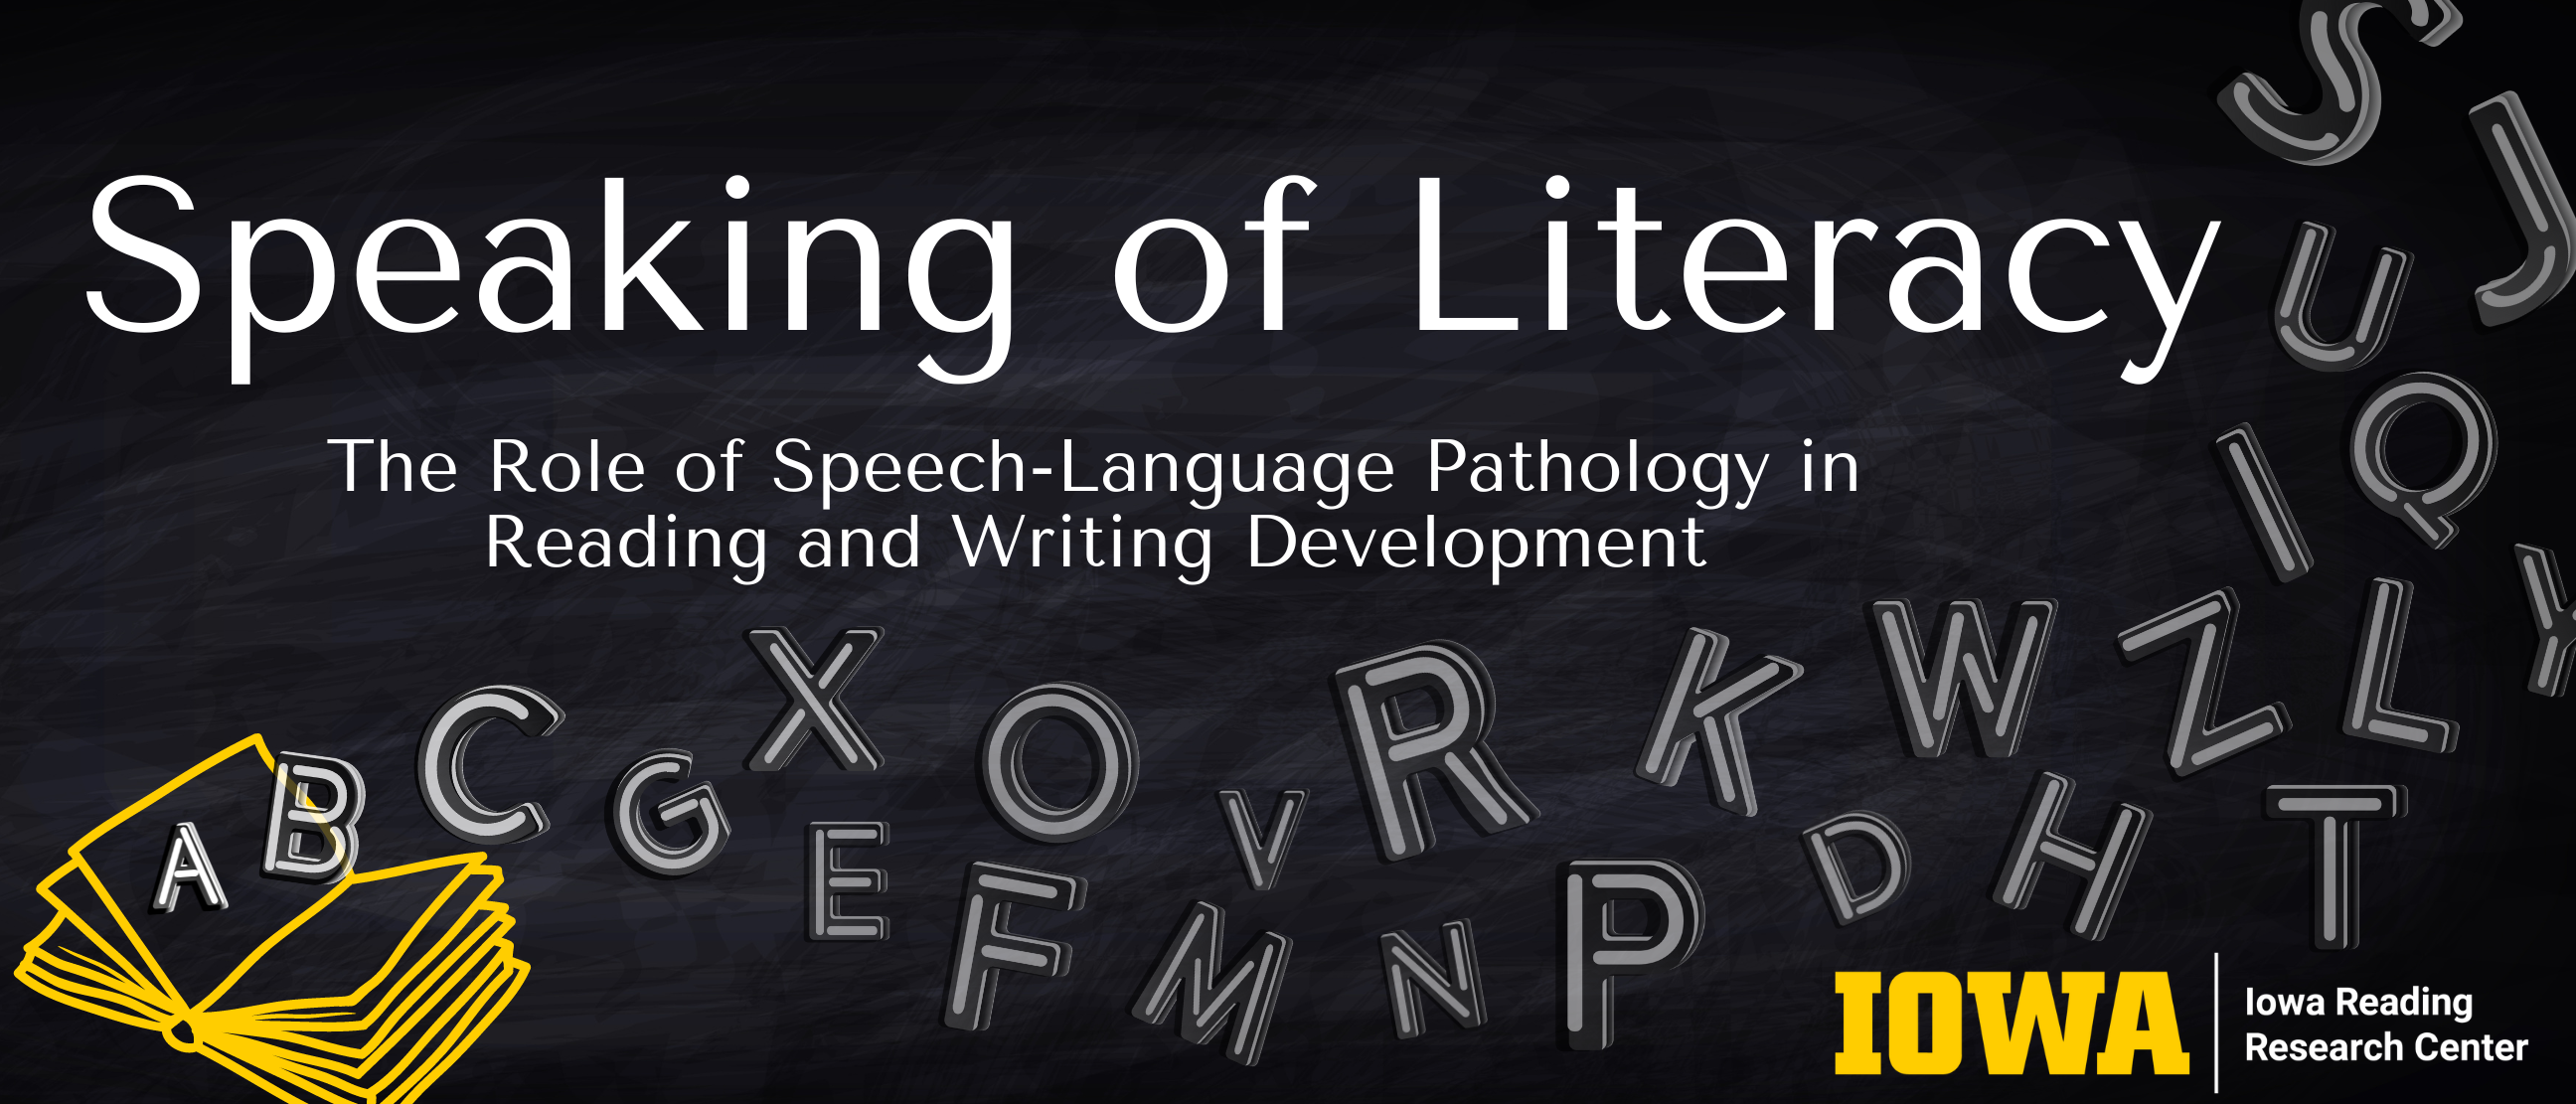 Speaking of Literacy title card and a book with letters floating out of it